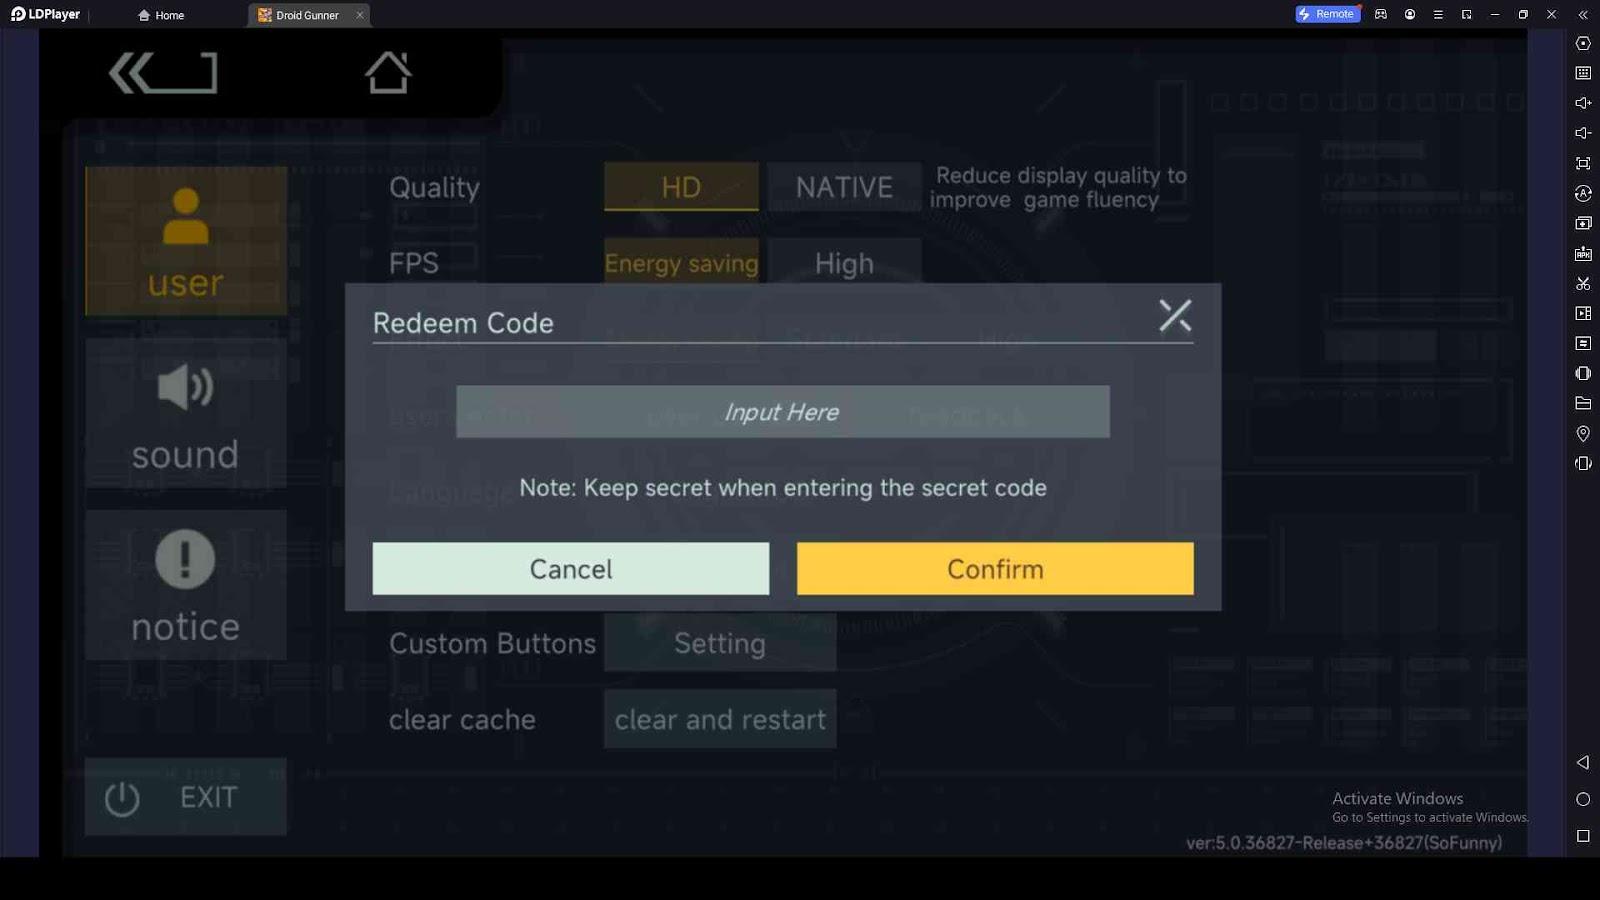 How to Redeem Codes in Droid Gunner